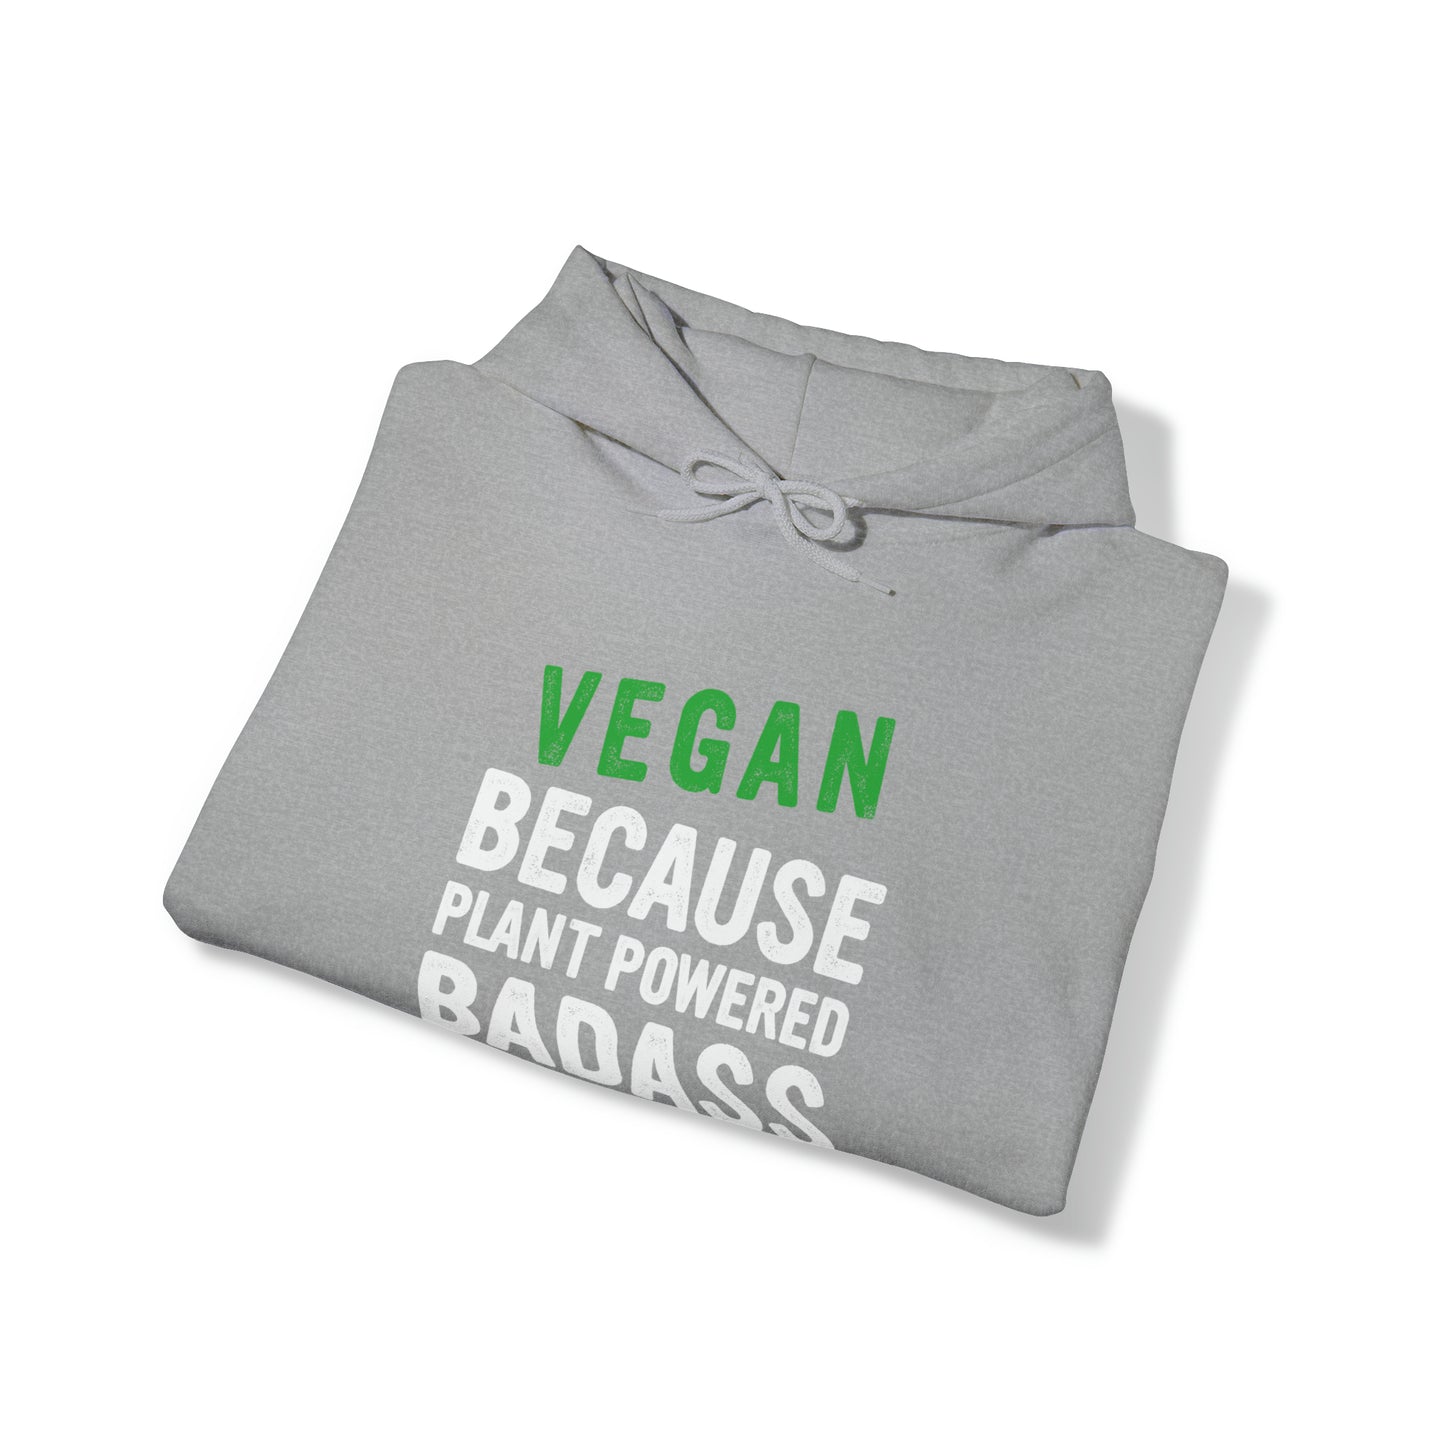 Vegan Because Plant Powered Badass was not and official title -  Hoodie